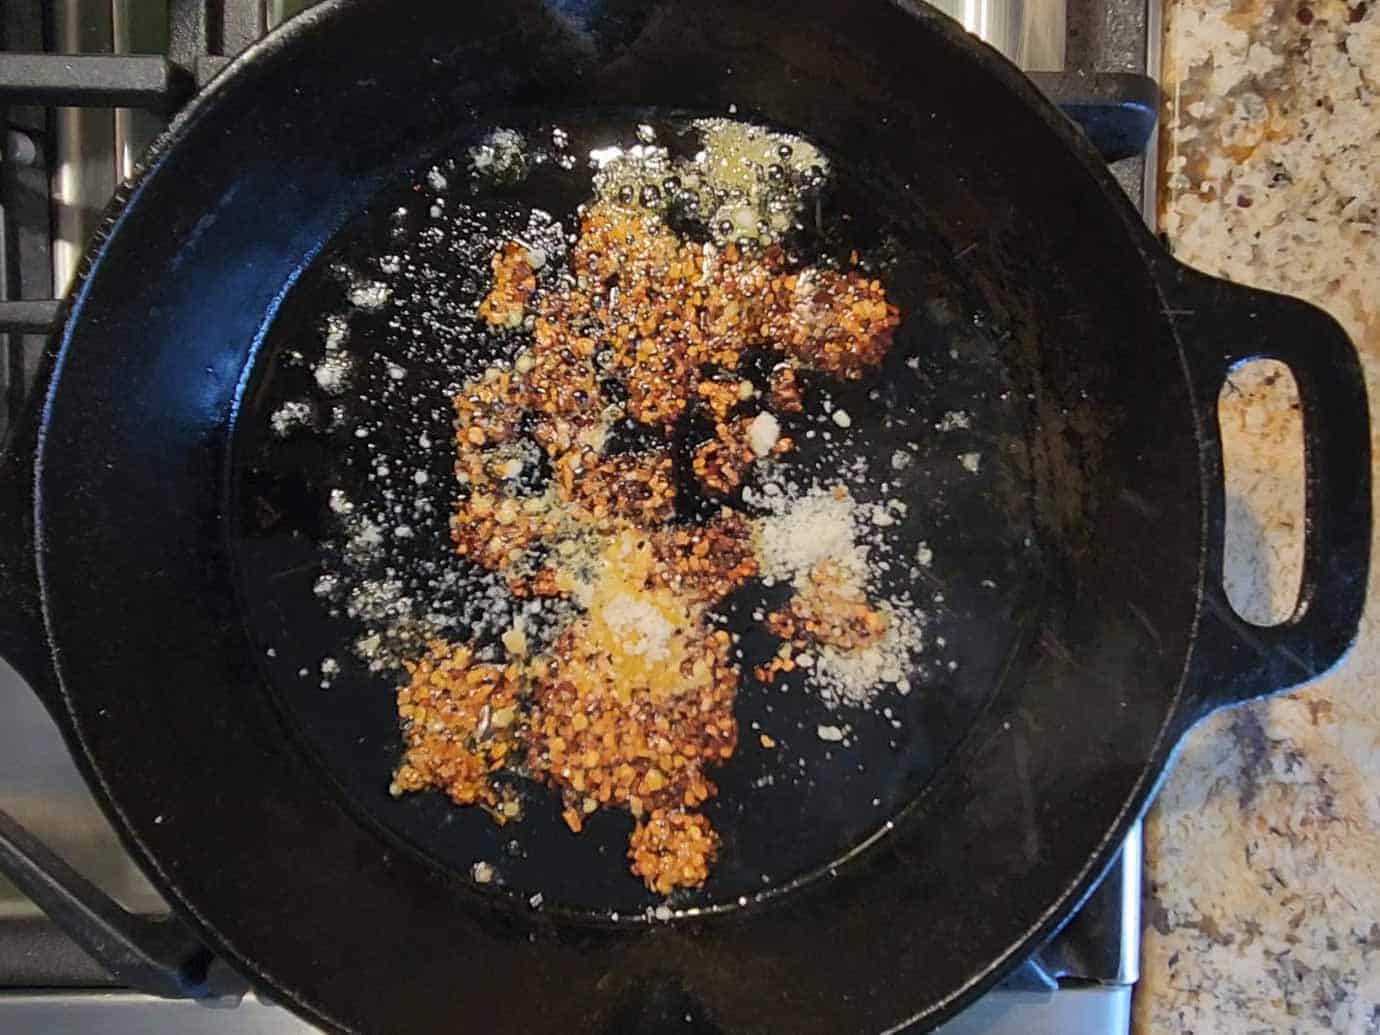 Chili crisp and parmesan cheese added to a hot skillet.